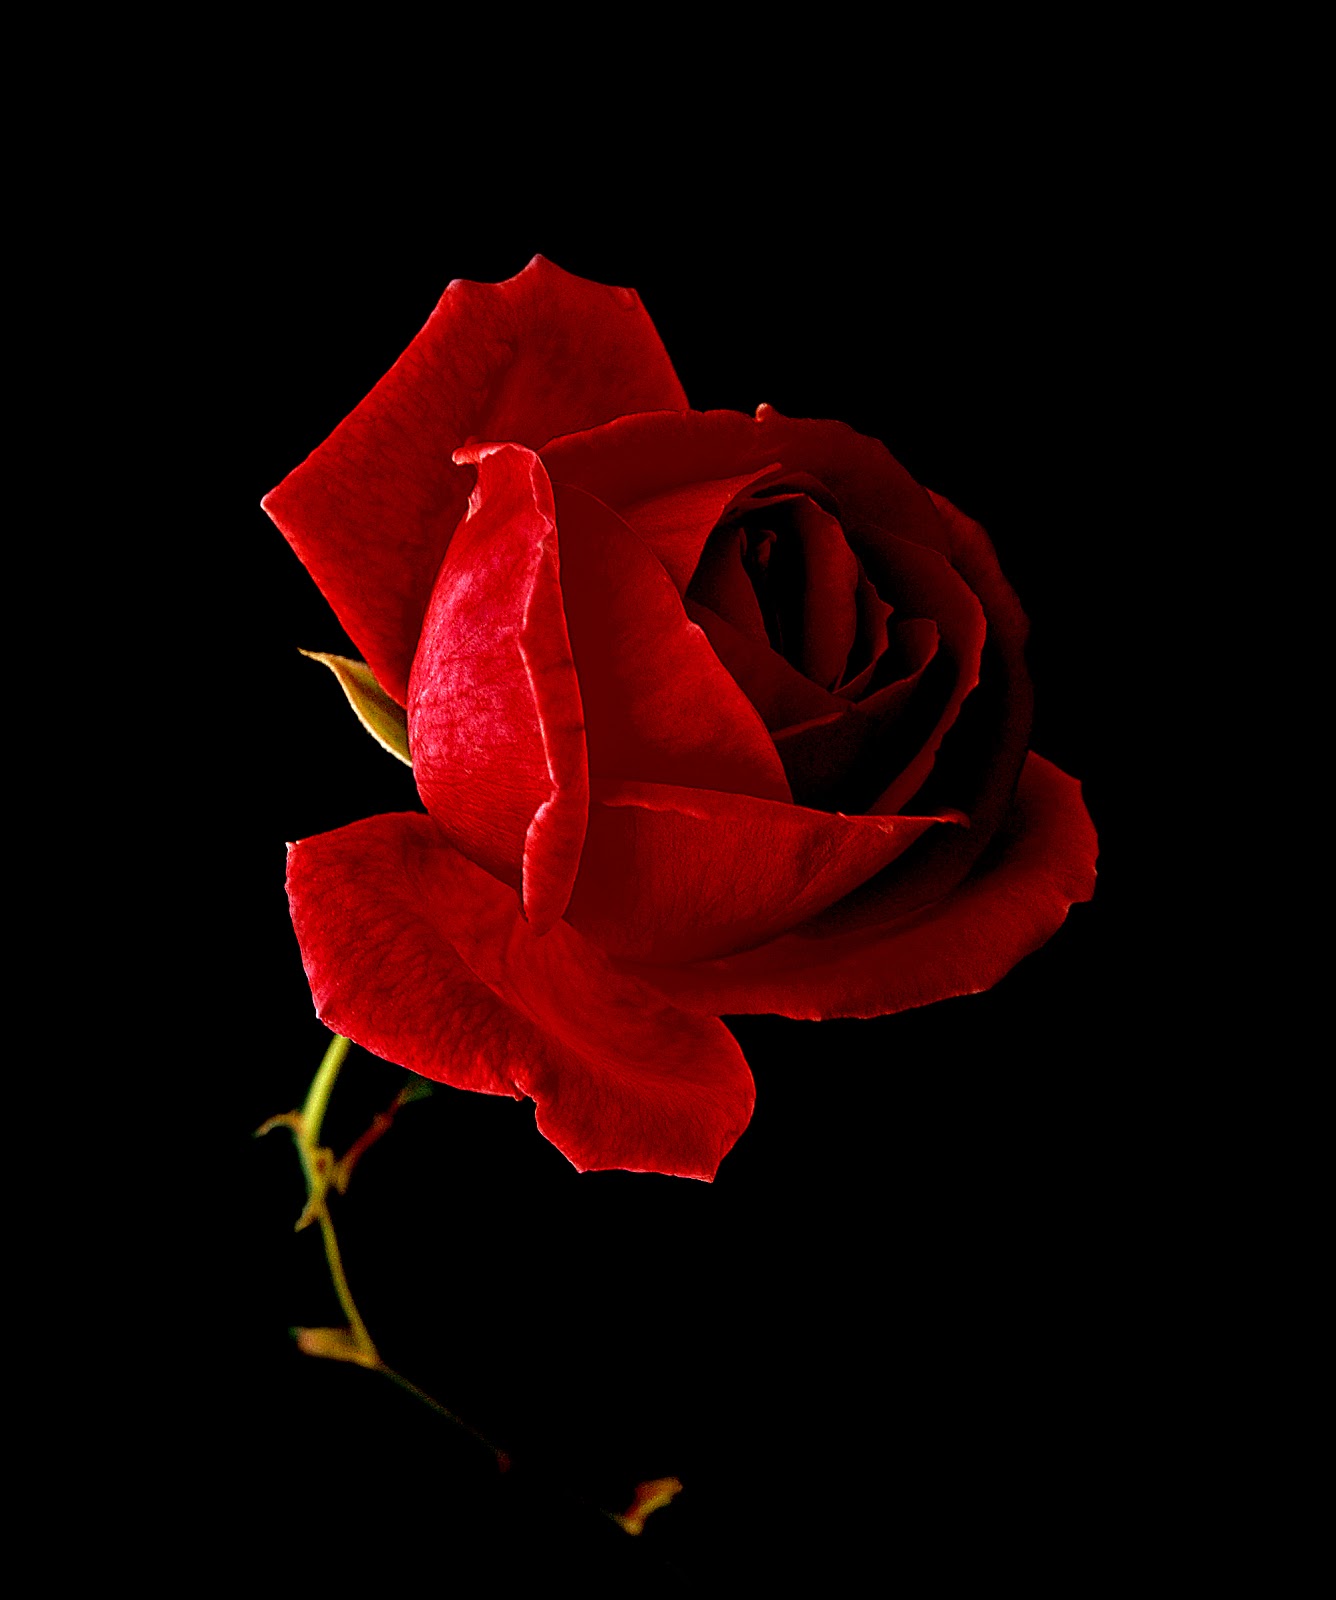 Red Rose Black And White Background On